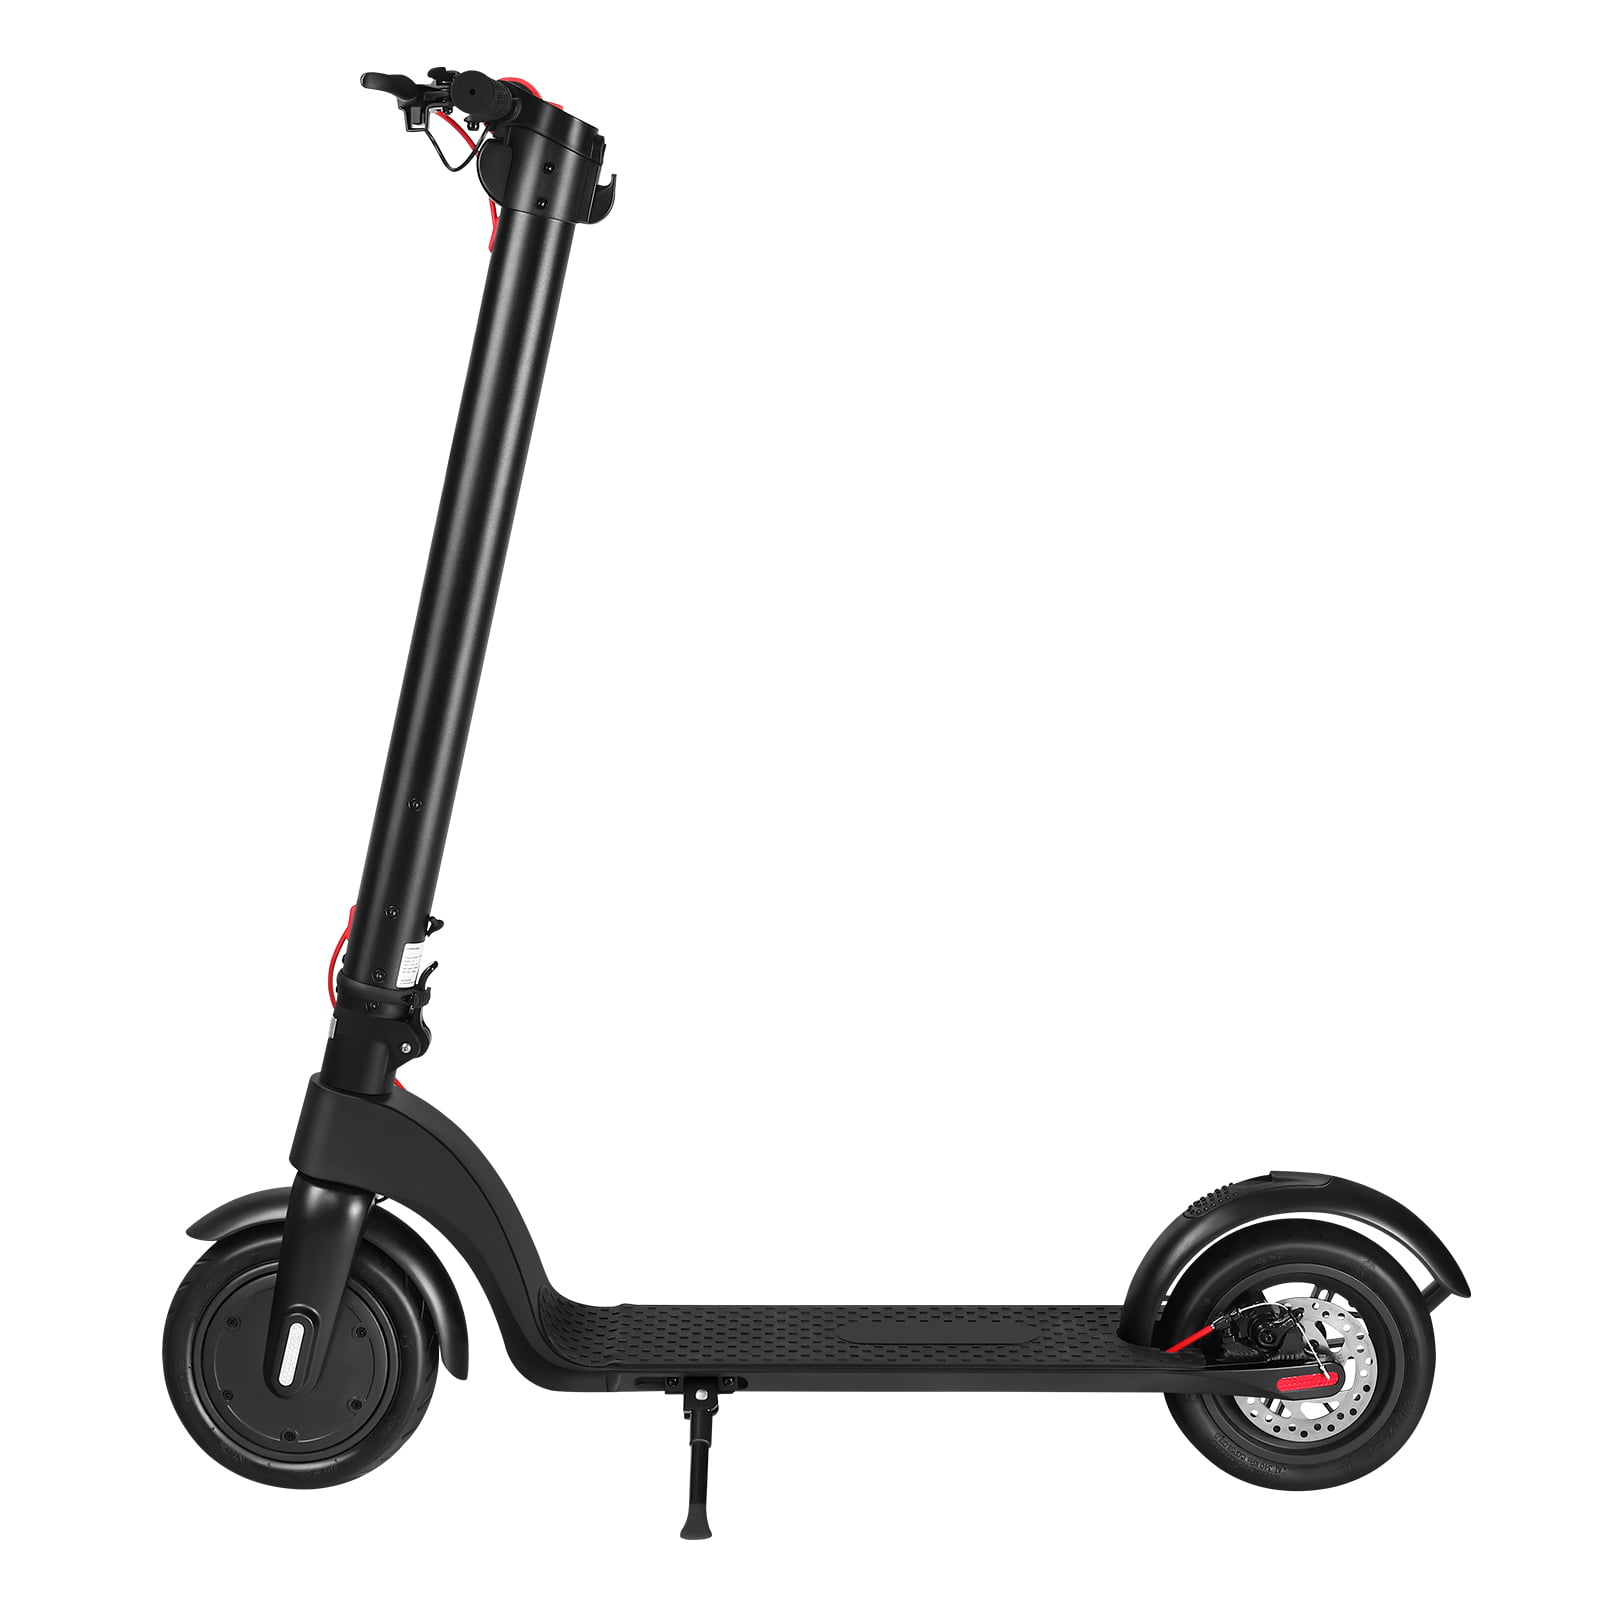 Commuting Electric Scooter Lightweight Folding Electric Scooters with Led Lights,for Kids 8 Years and up US Stock Ninasill 8 Folding Electric Scooter for Adults